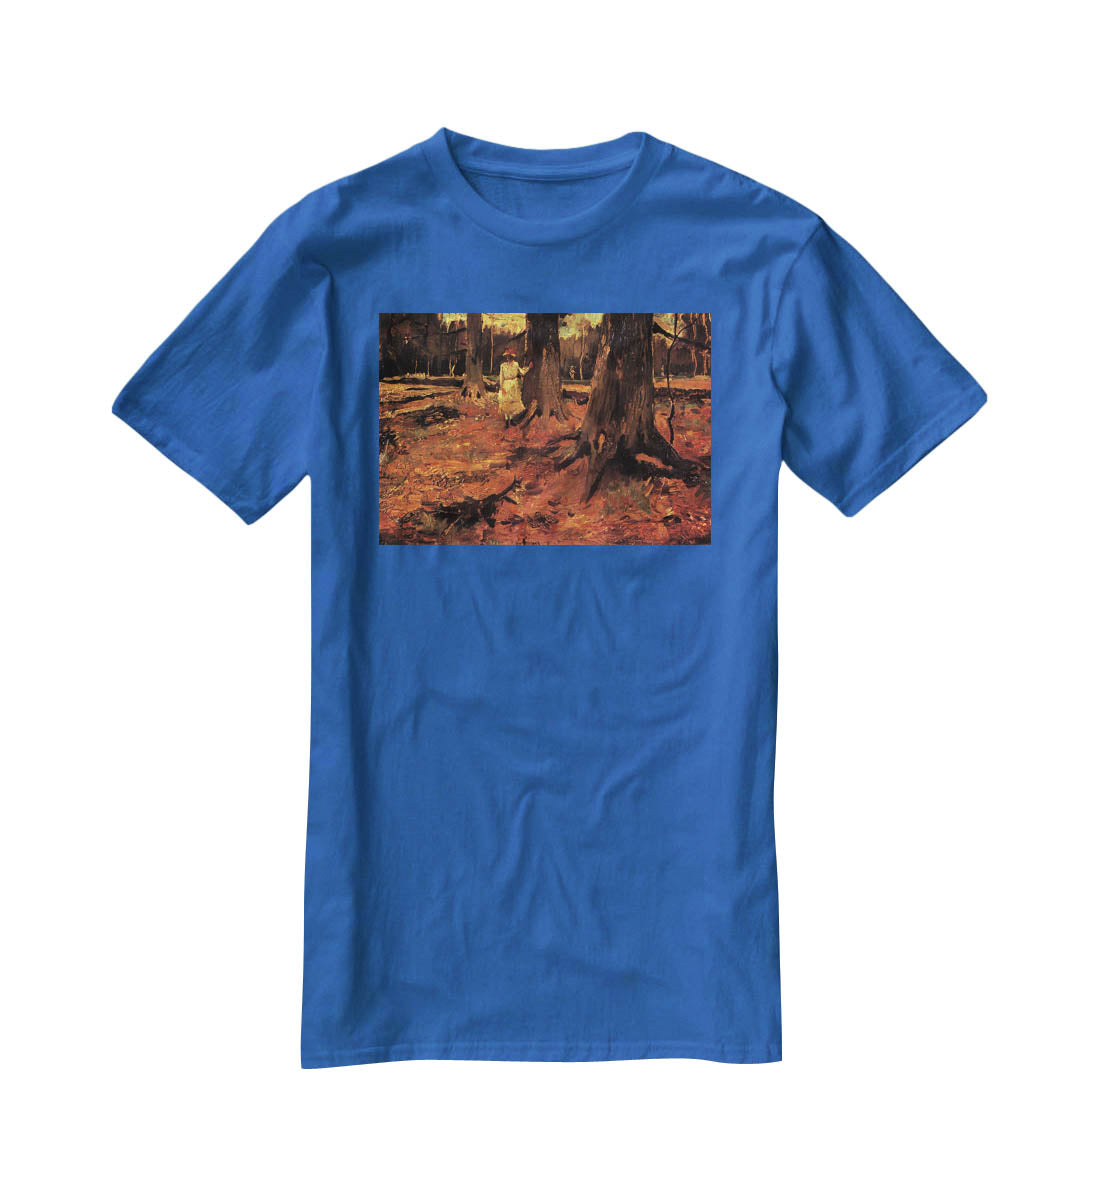 Girl in White in the Woods by Van Gogh T-Shirt - Canvas Art Rocks - 2